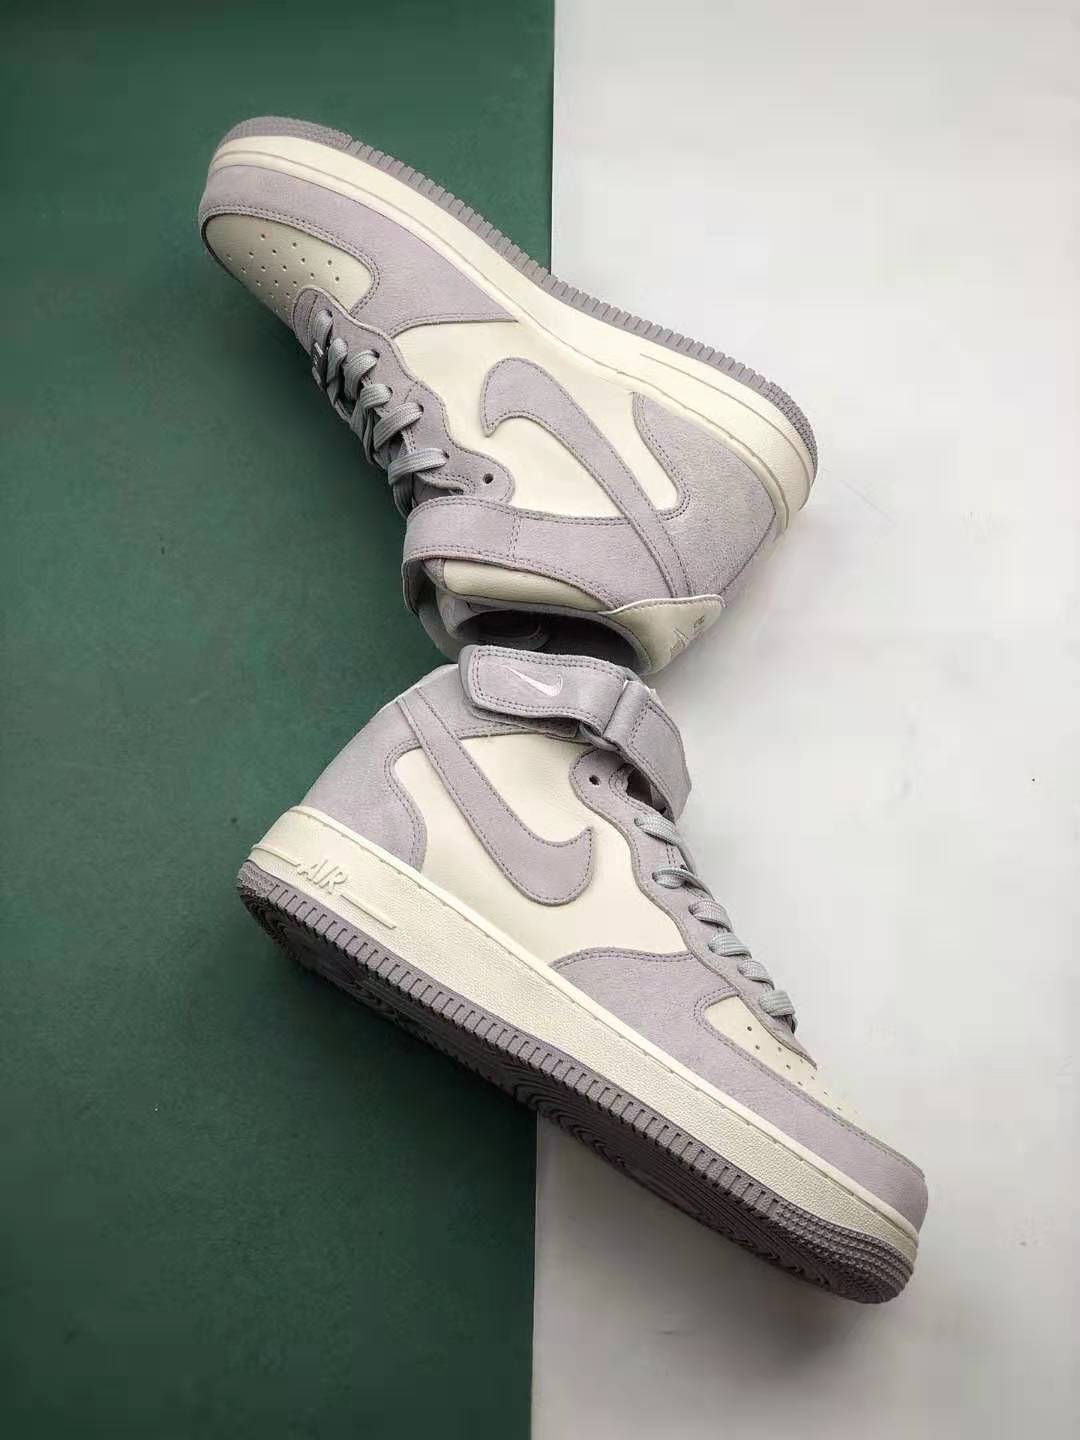 Nike Air Force 1 Mid 07 Mid Gray 596728-307 - Stylish Sneakers for Men